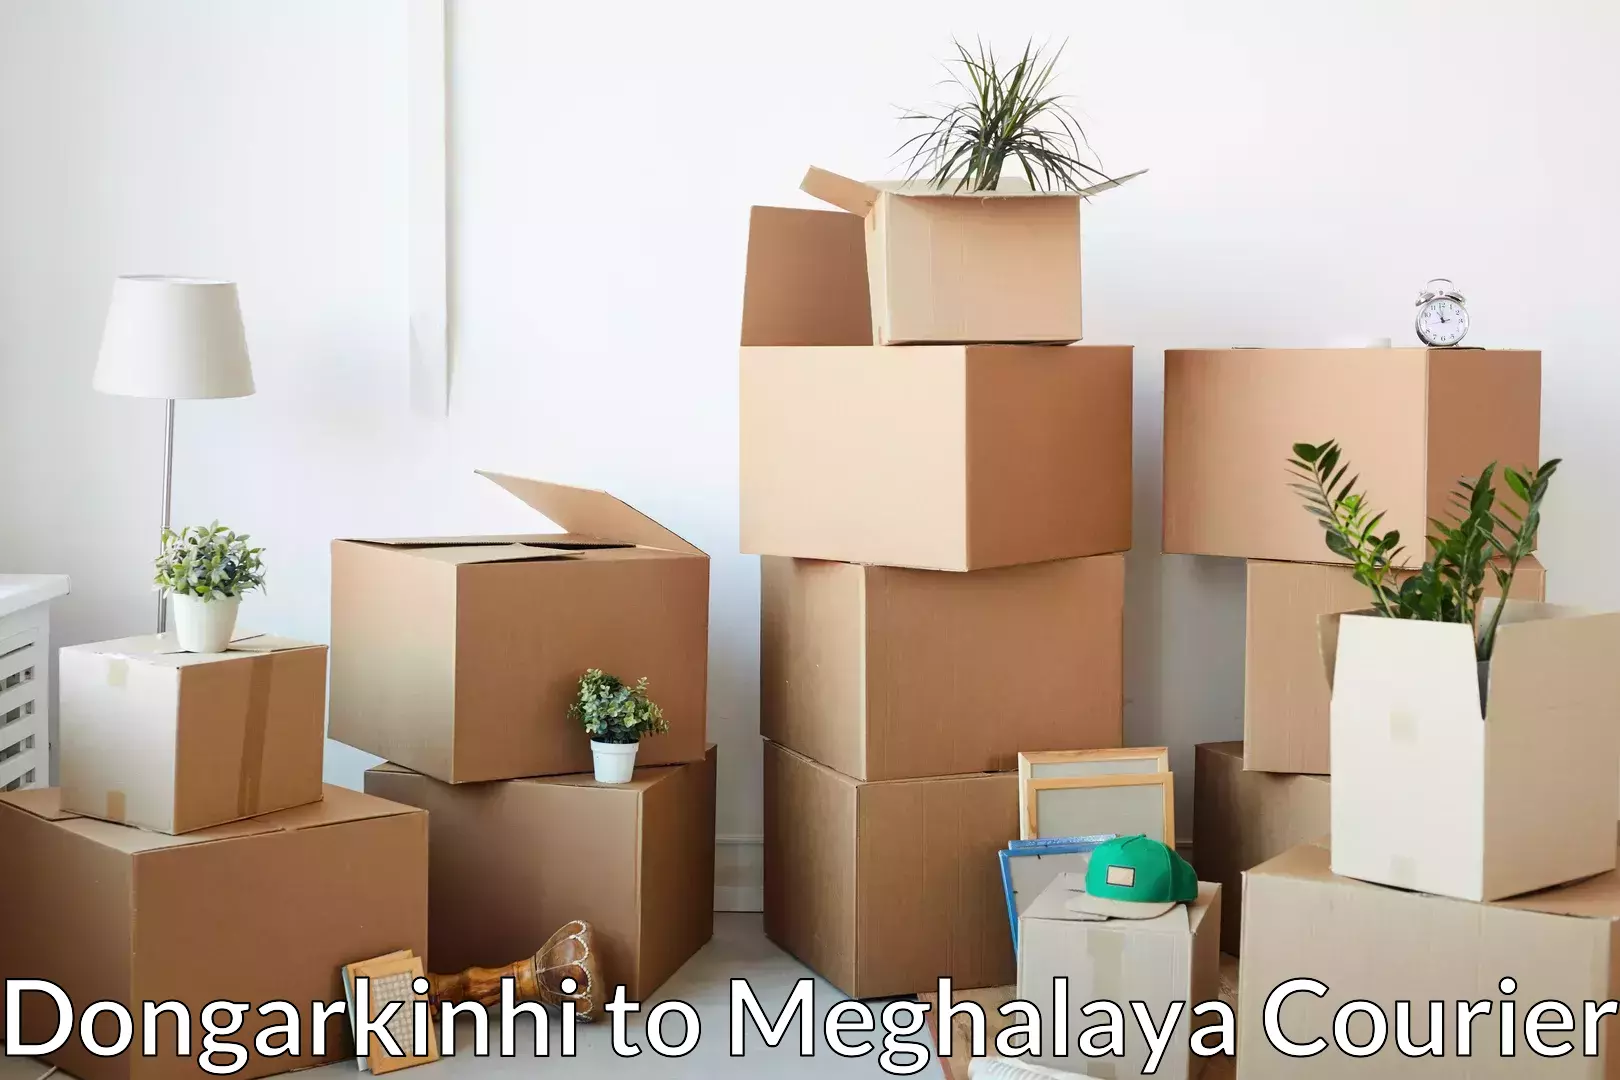 Professional furniture movers Dongarkinhi to Dkhiah West